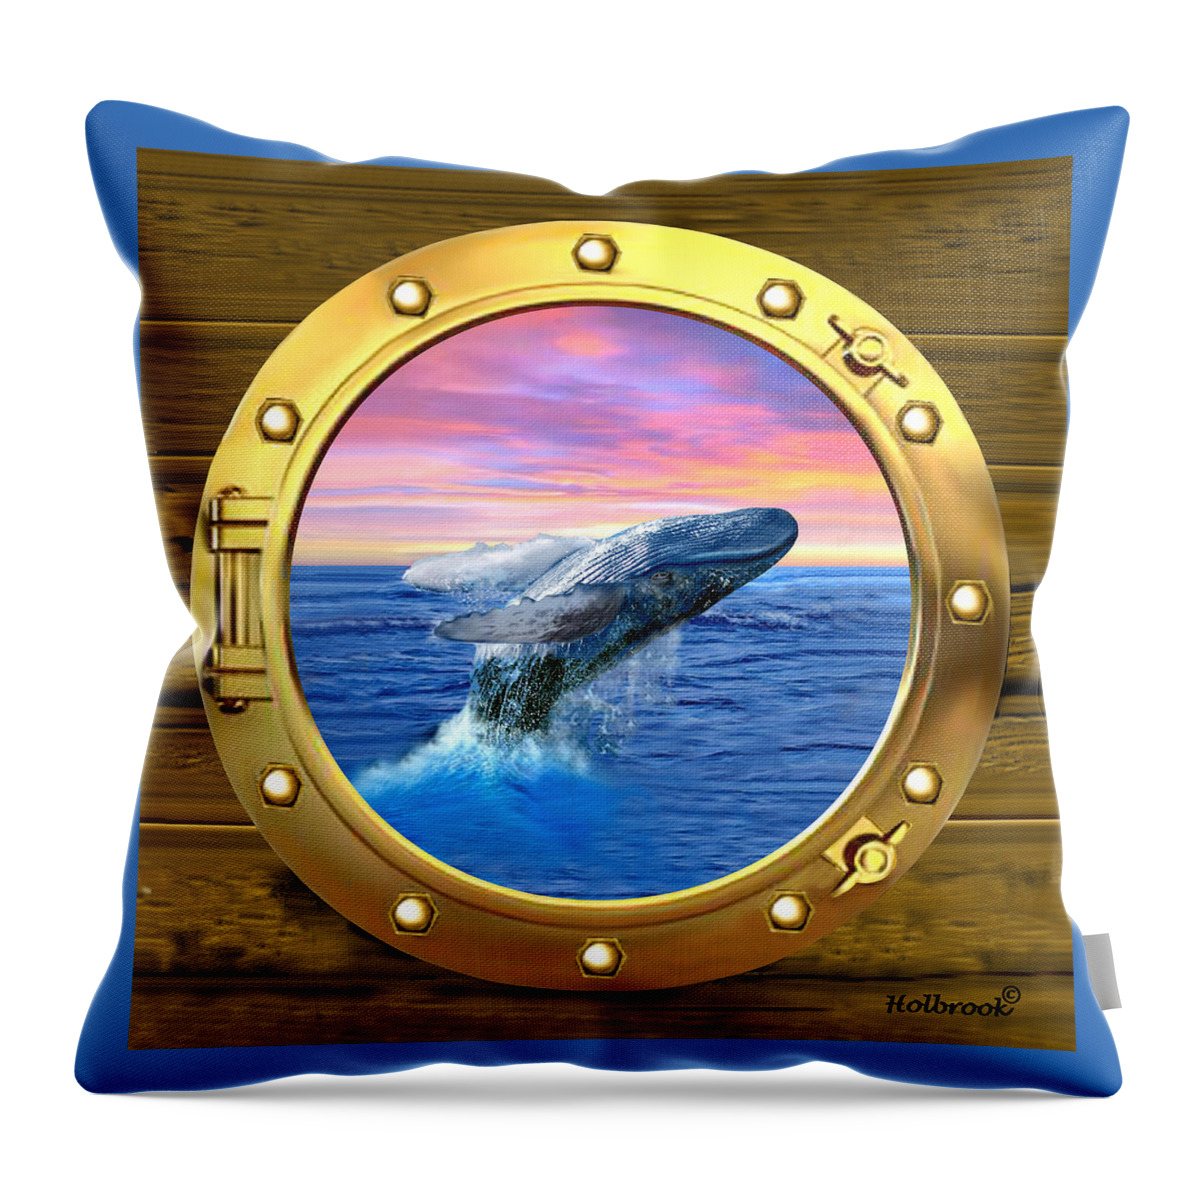 Whale Throw Pillow featuring the digital art Porthole View of Breaching Whale by Glenn Holbrook